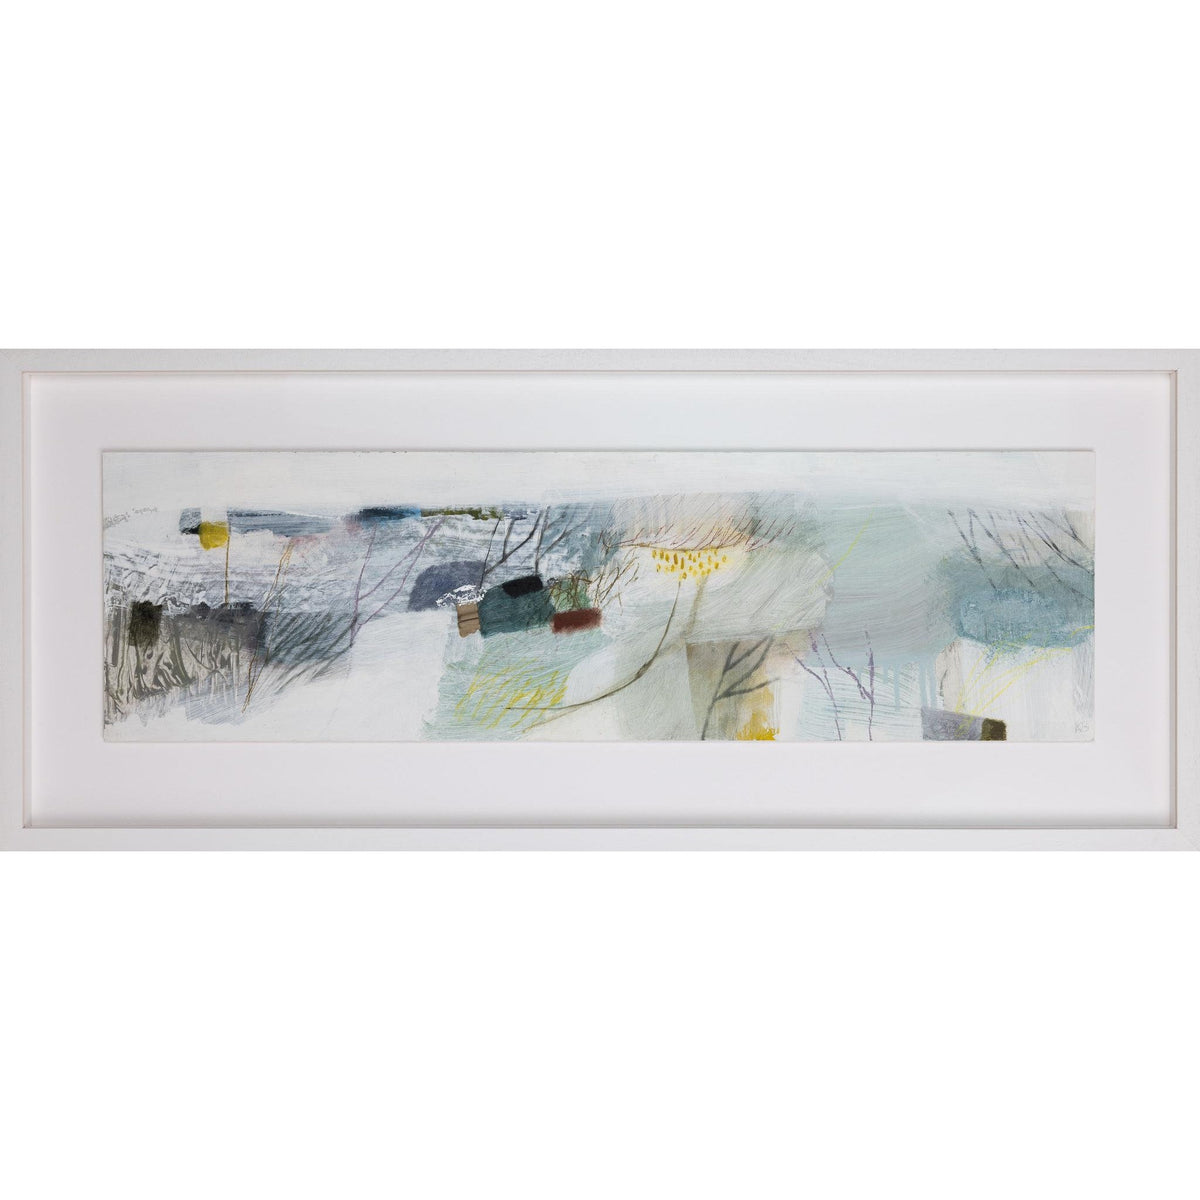 Highland 3, mixed media by Karen Birchwood, available from Padstow Gallery, Cornwall